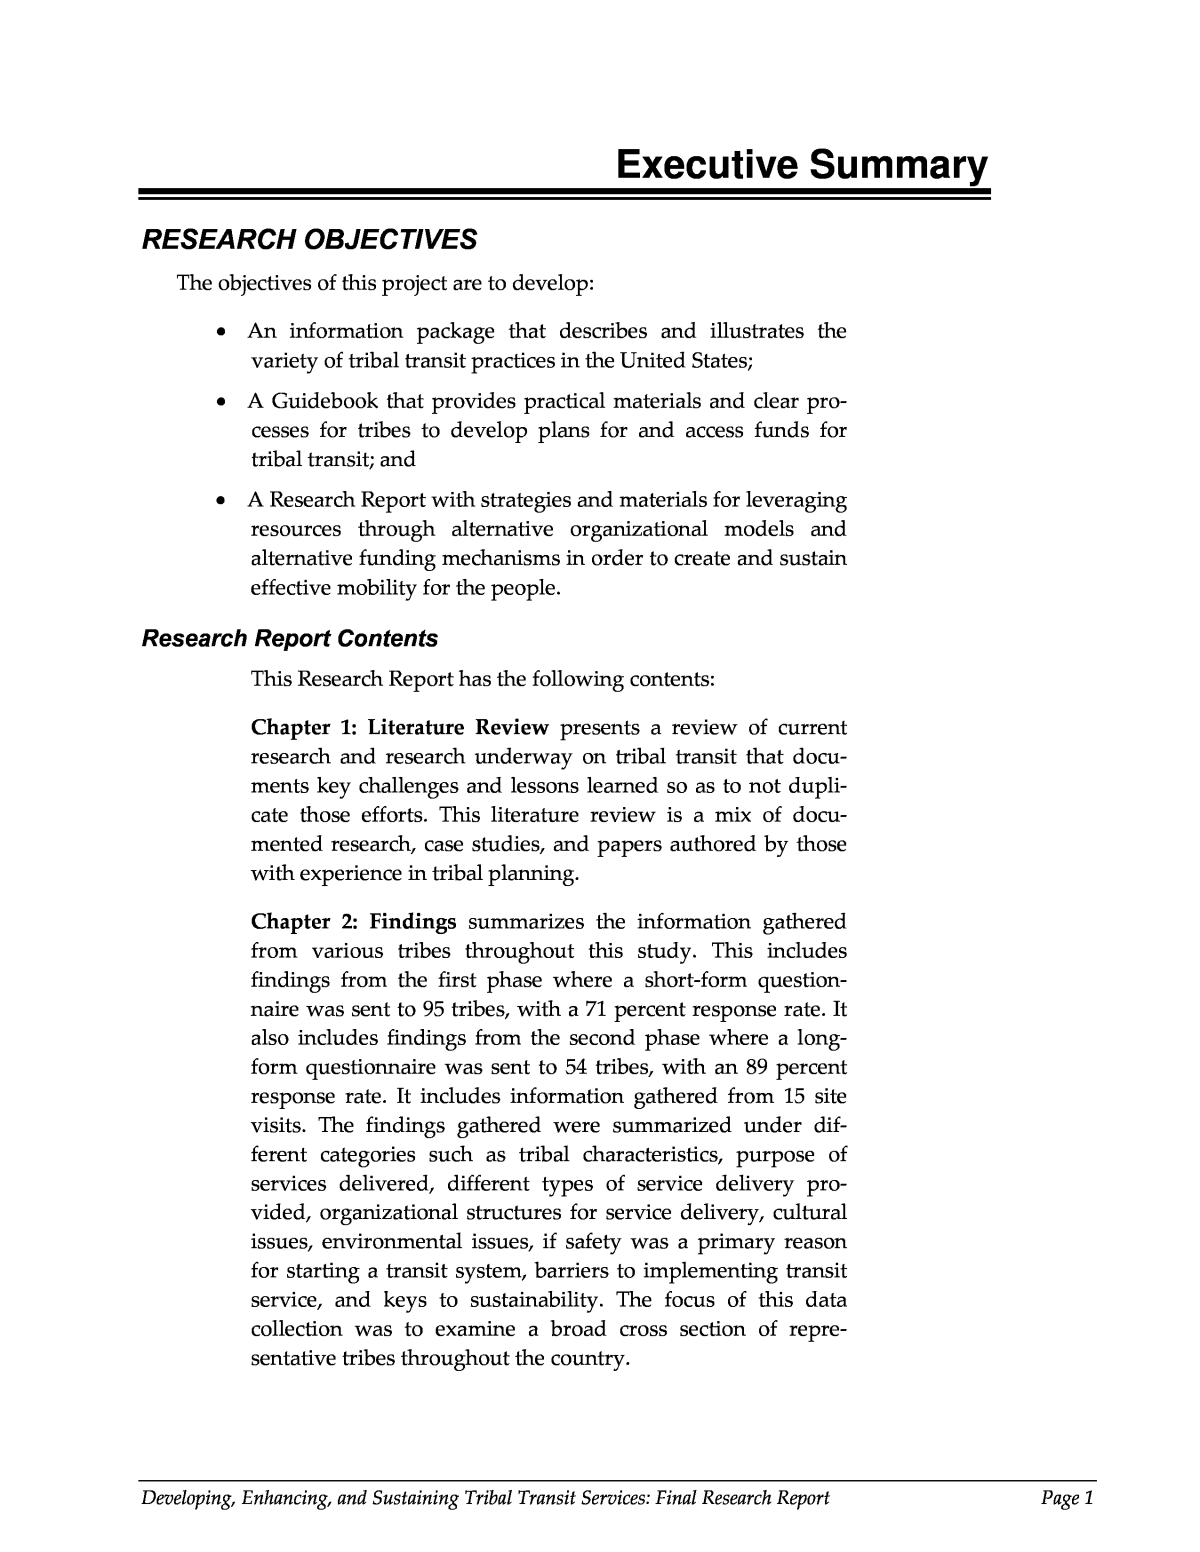 executive summary sample research paper